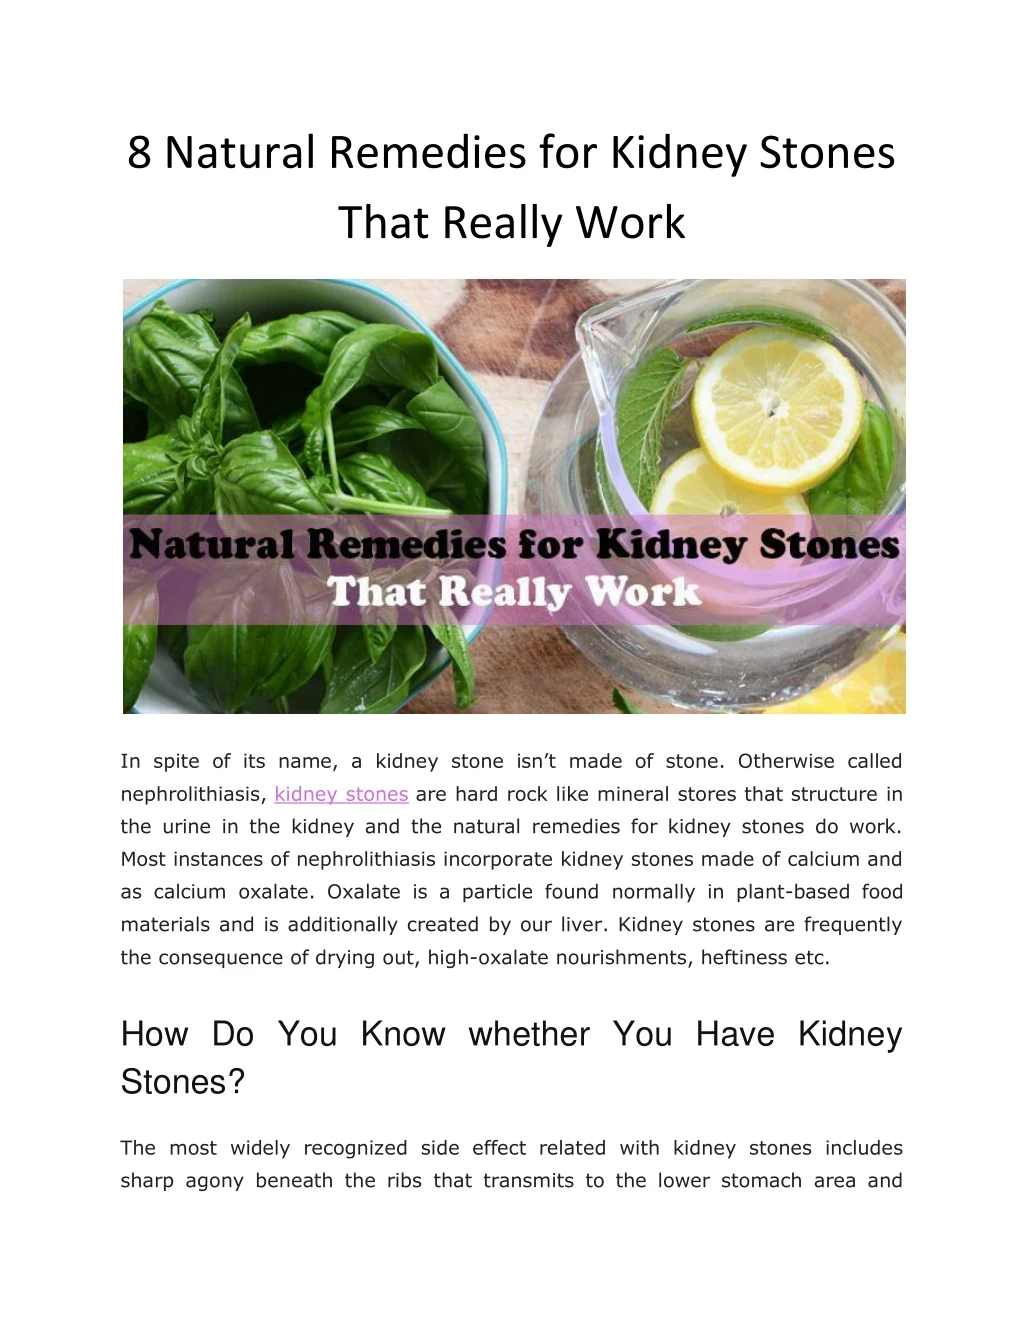 8 natural remedies for kidney stones that really